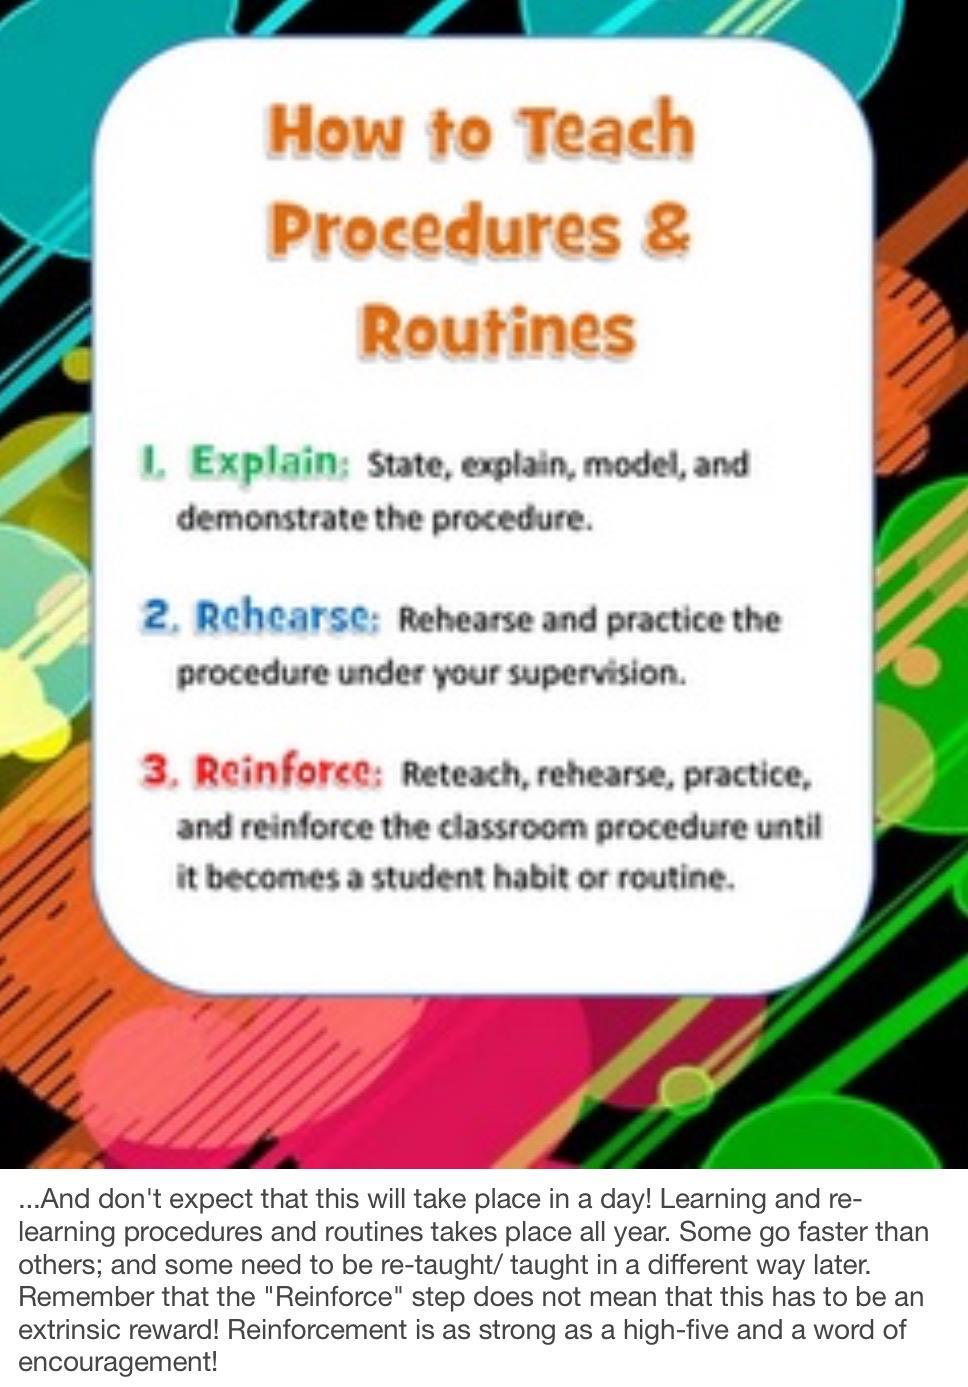 Then, have the students practice the procedure, walking them through each step with